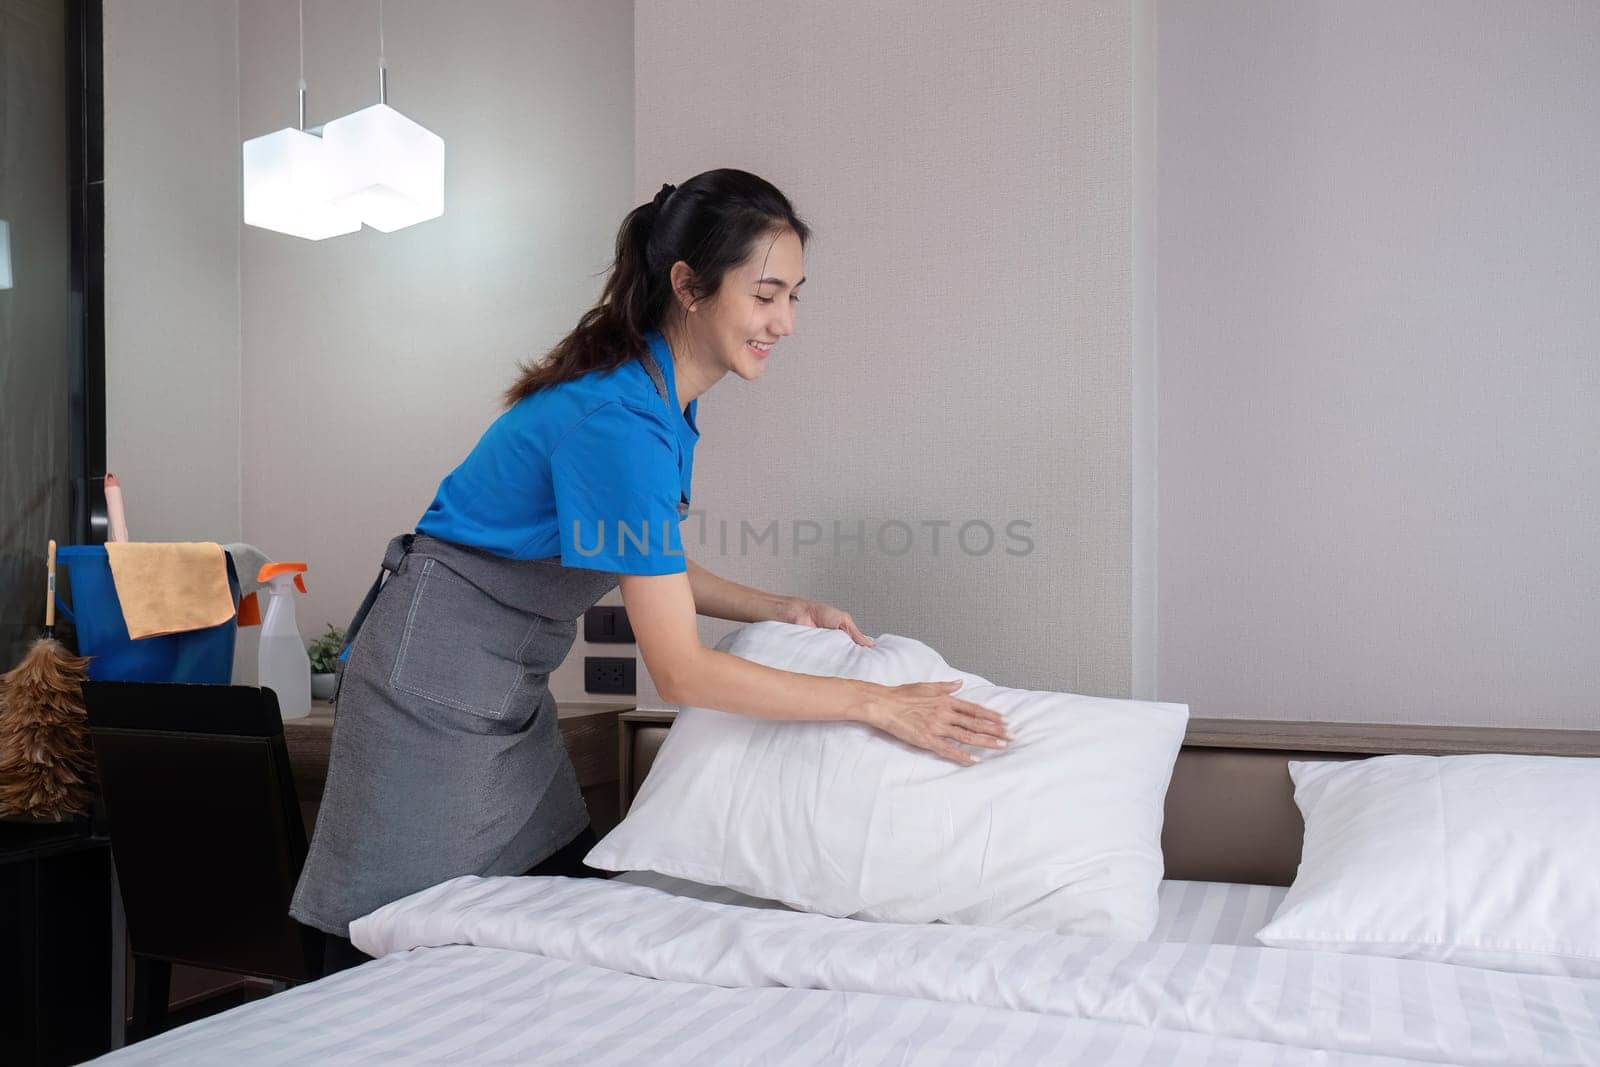 The bedroom maid is cleaning the bed and preparing the bedding..